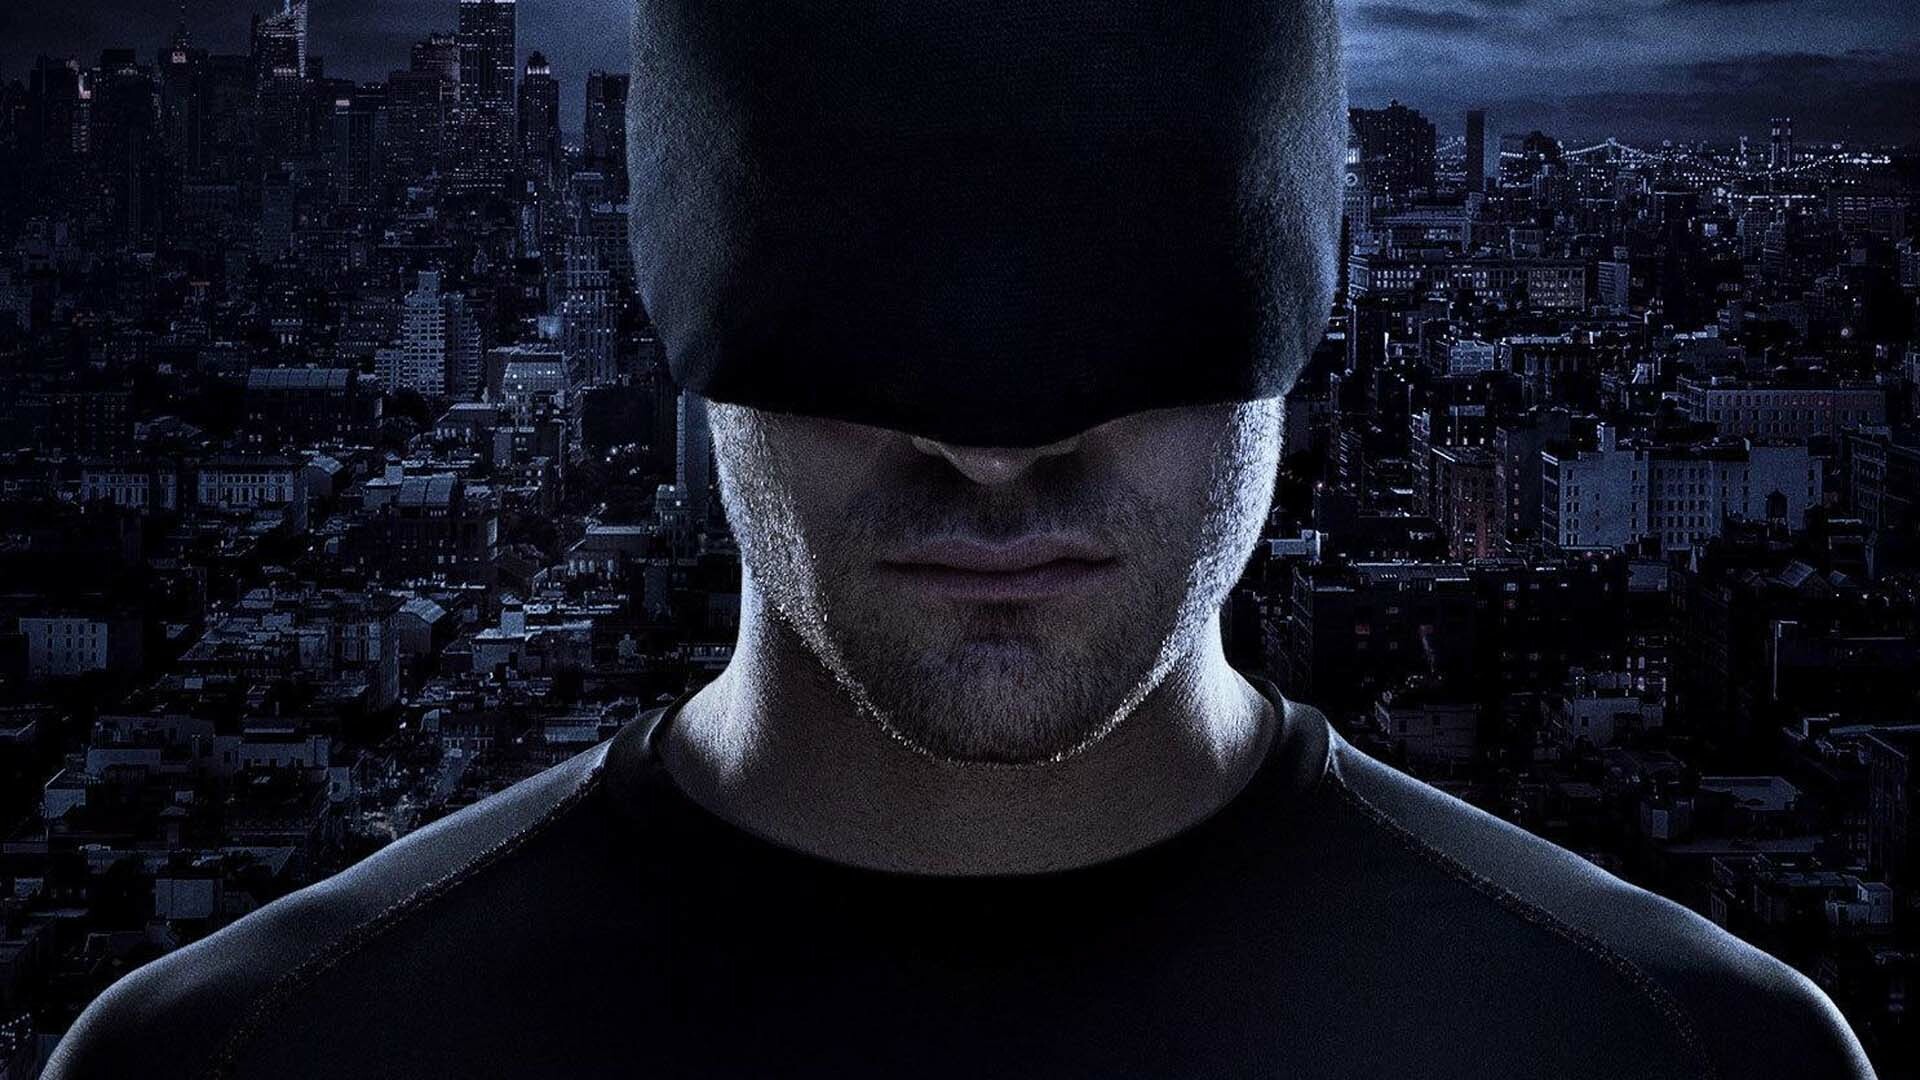 Daredevil (TV Series): Netflix, Season one became the second-most pirated show in the world after Game of Thrones. 1920x1080 Full HD Background.